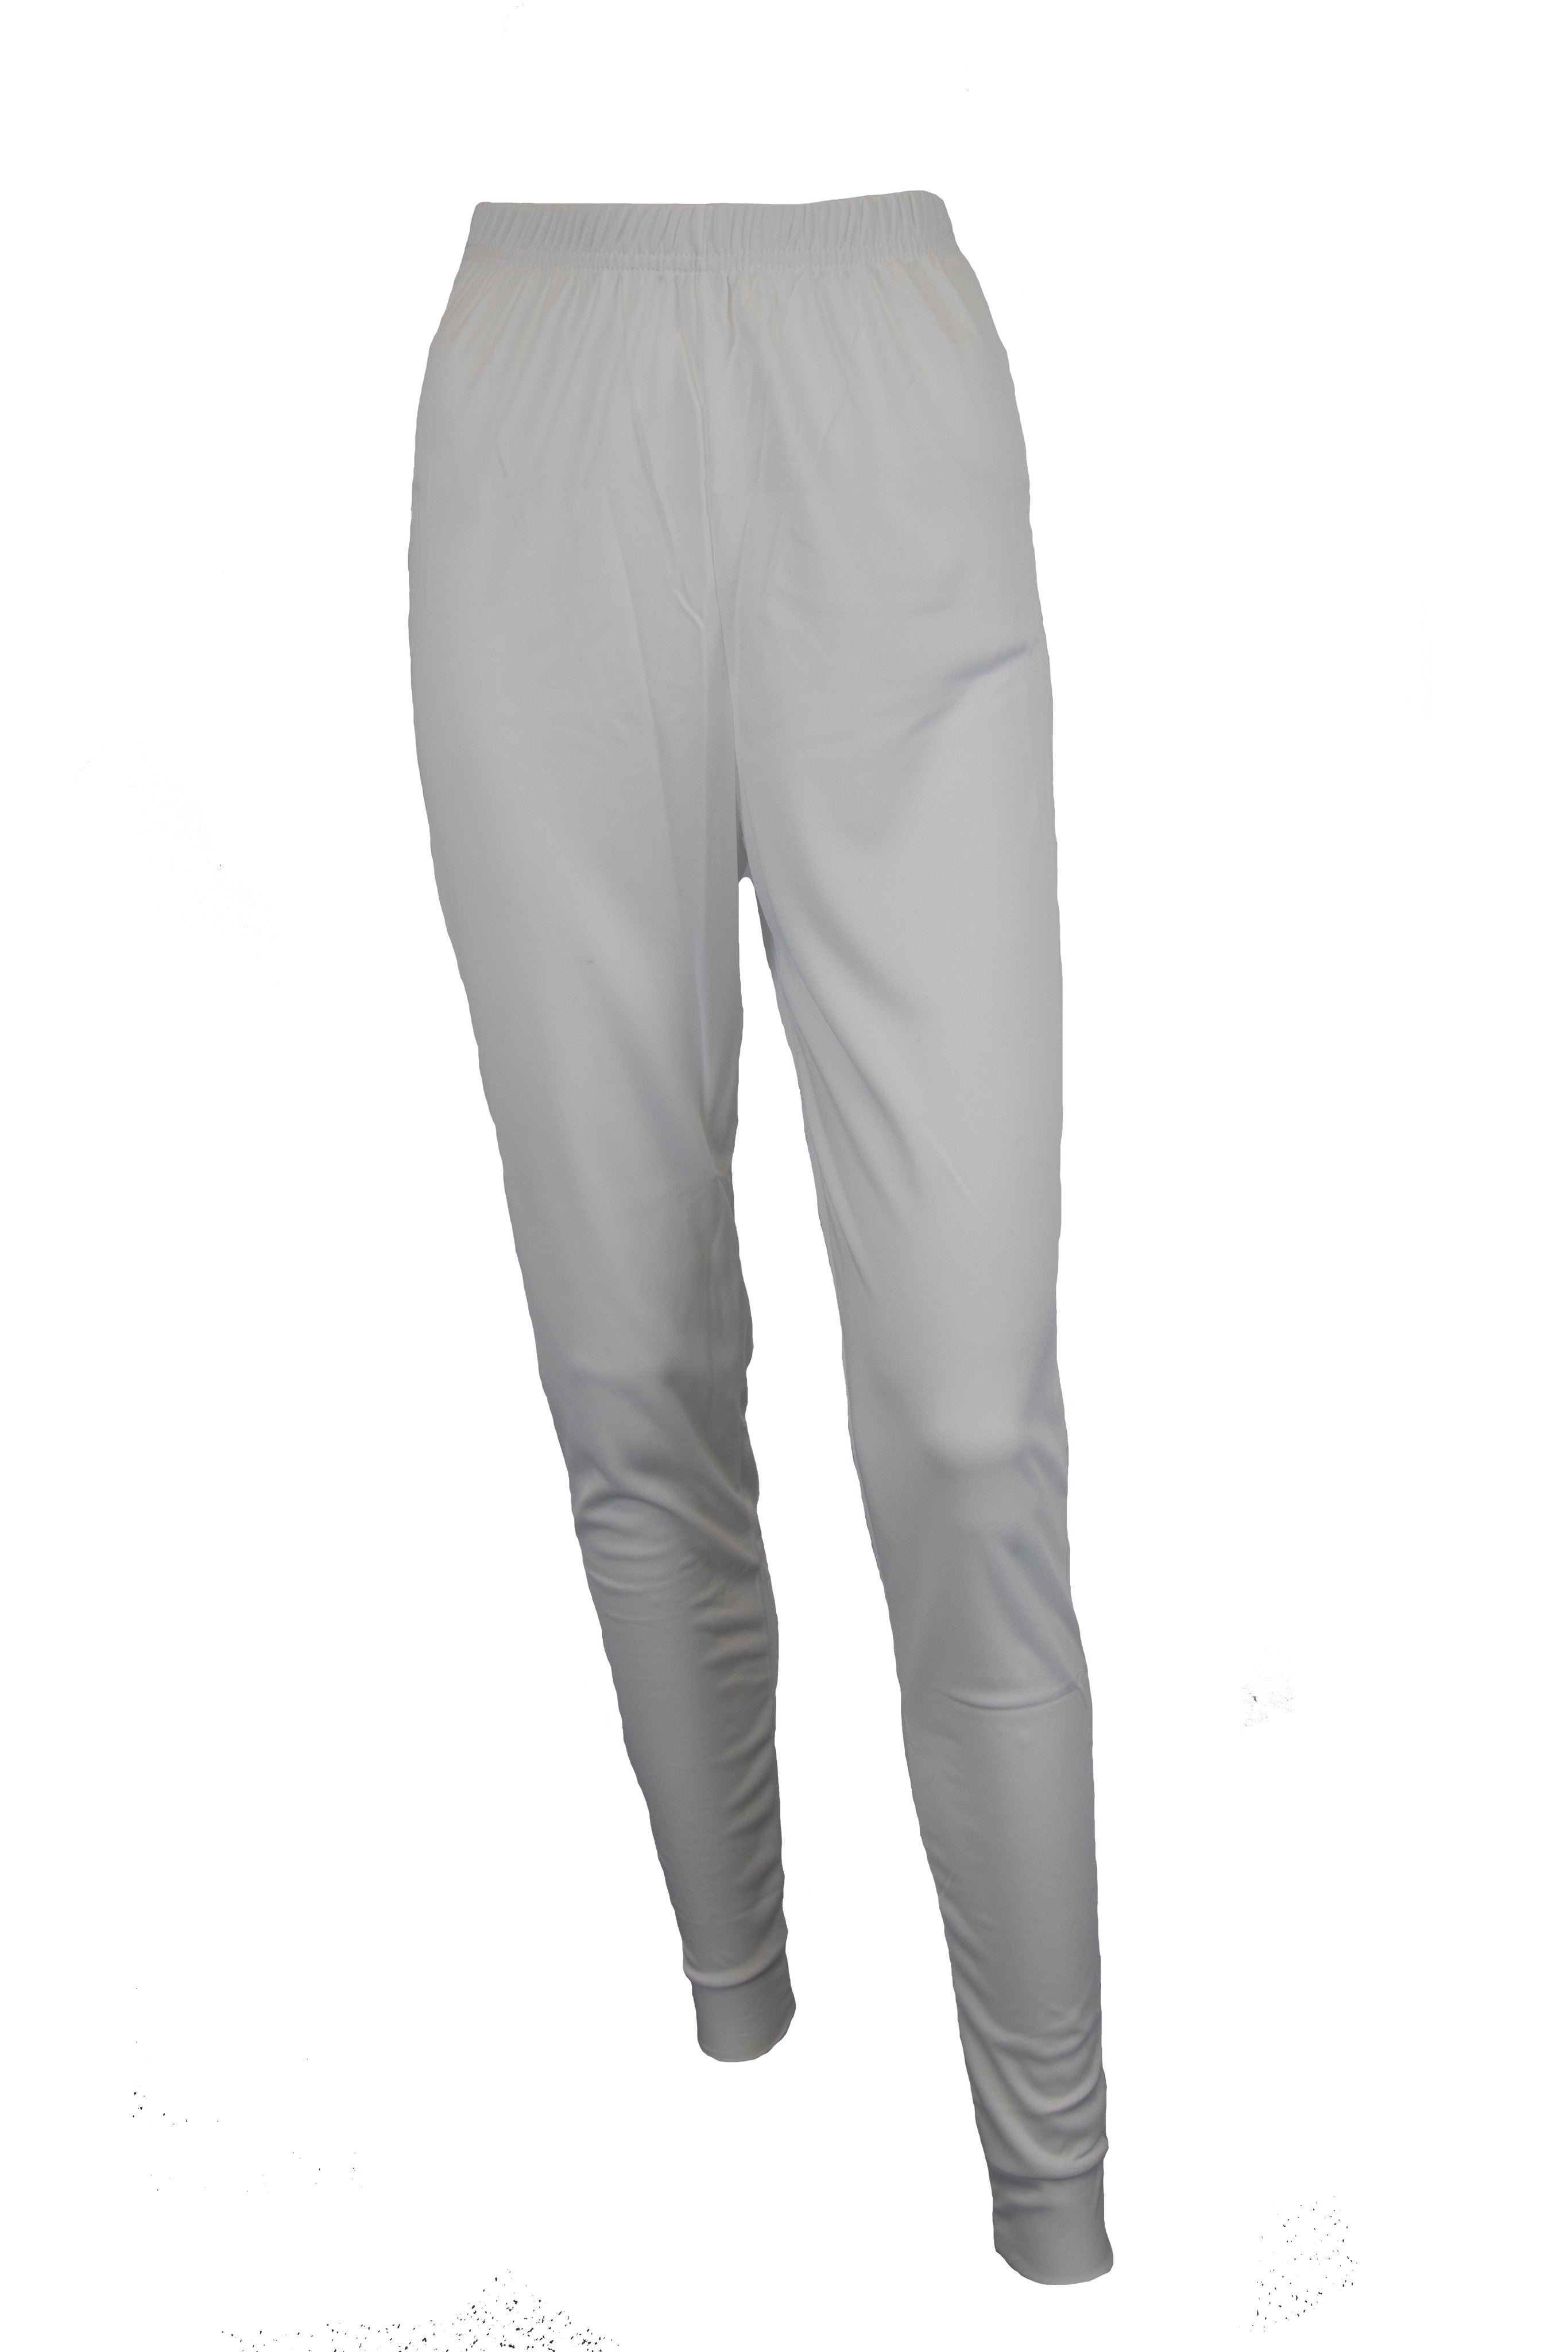 Men's Thermal Bottoms - Kenyon Consumer Products